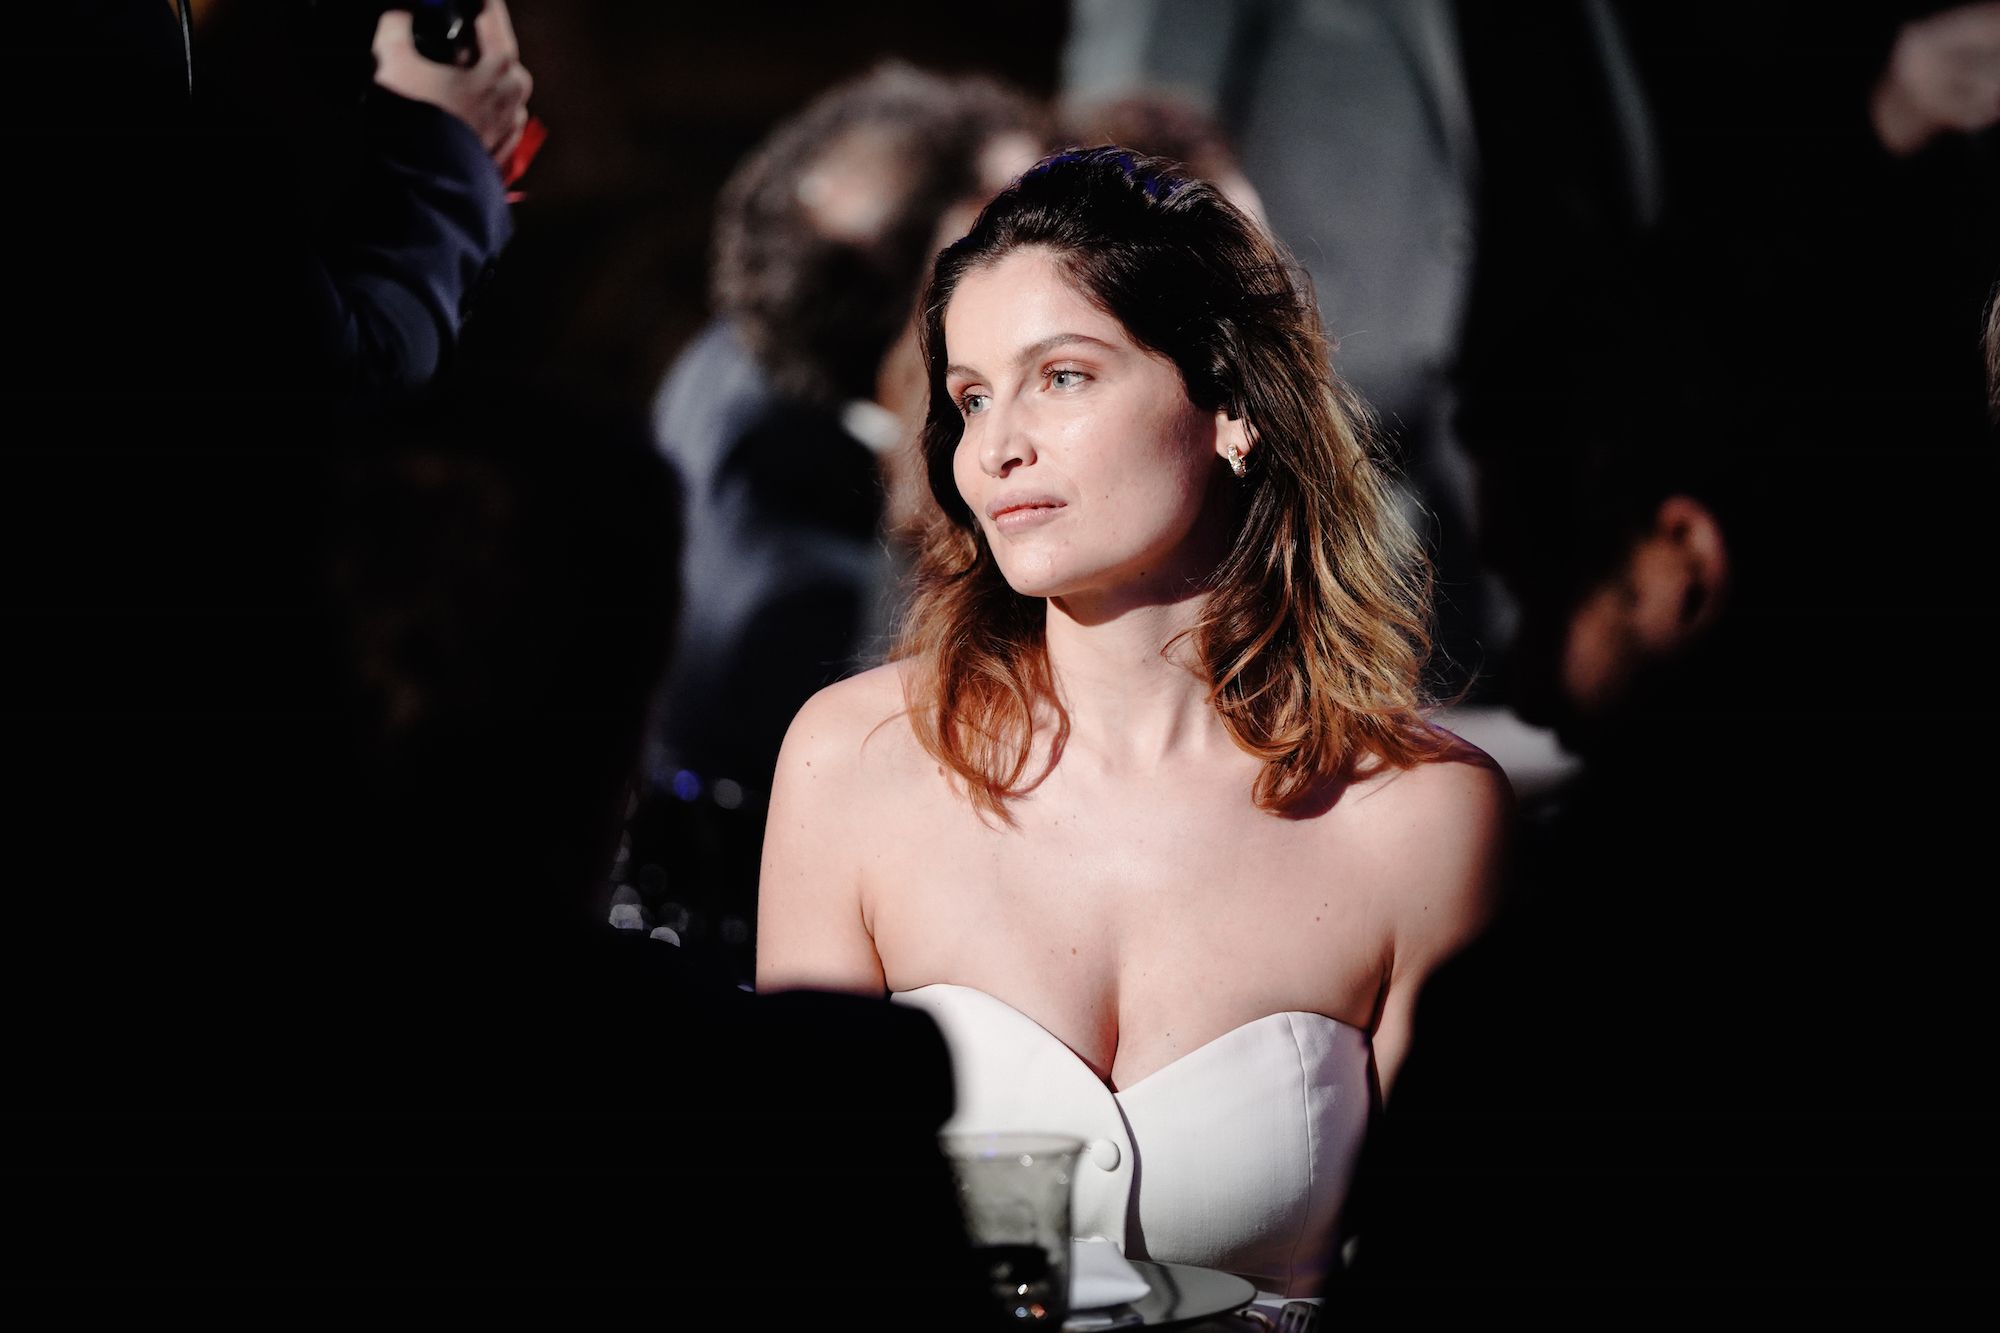 paris, france   january 13 editors note image has been digitally enhanced   laetitia casta attends the "cesar   revelations 2020" at petit palais ceremony on january 13, 2020 in paris, france photo by francois durandgetty images for the cesar